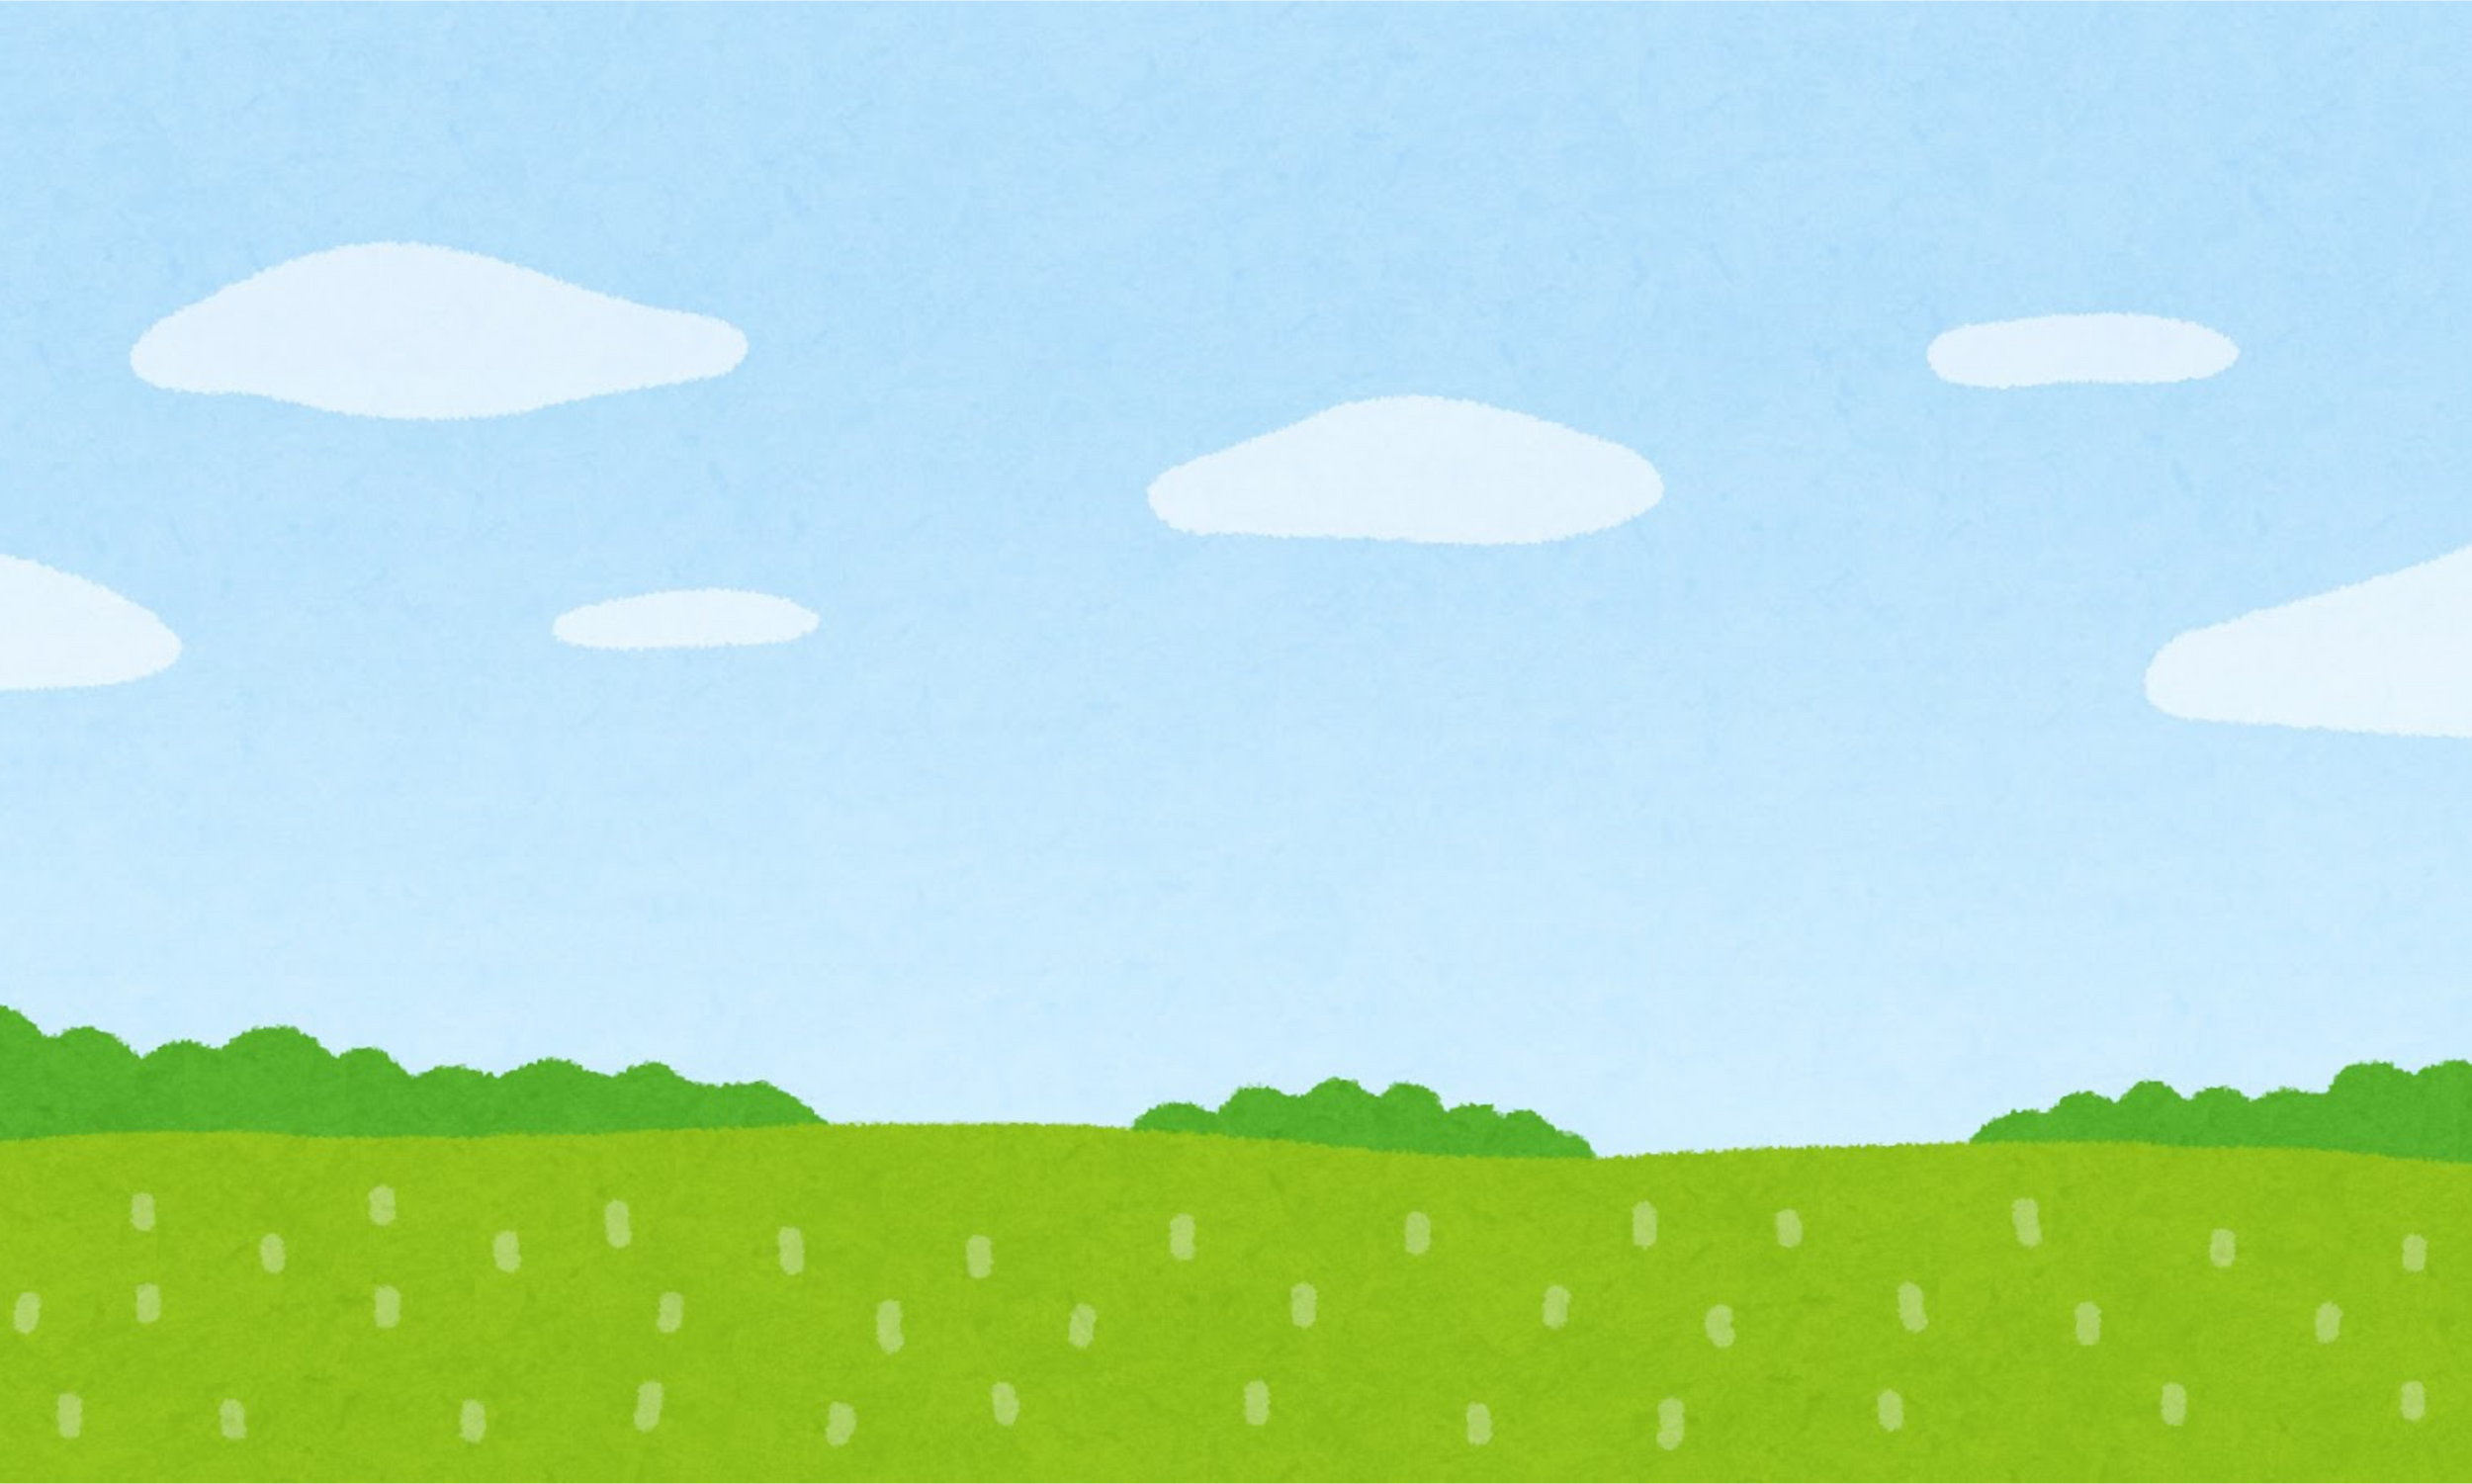 Illustration of a Grassy Meadow with a Blue Sky Background